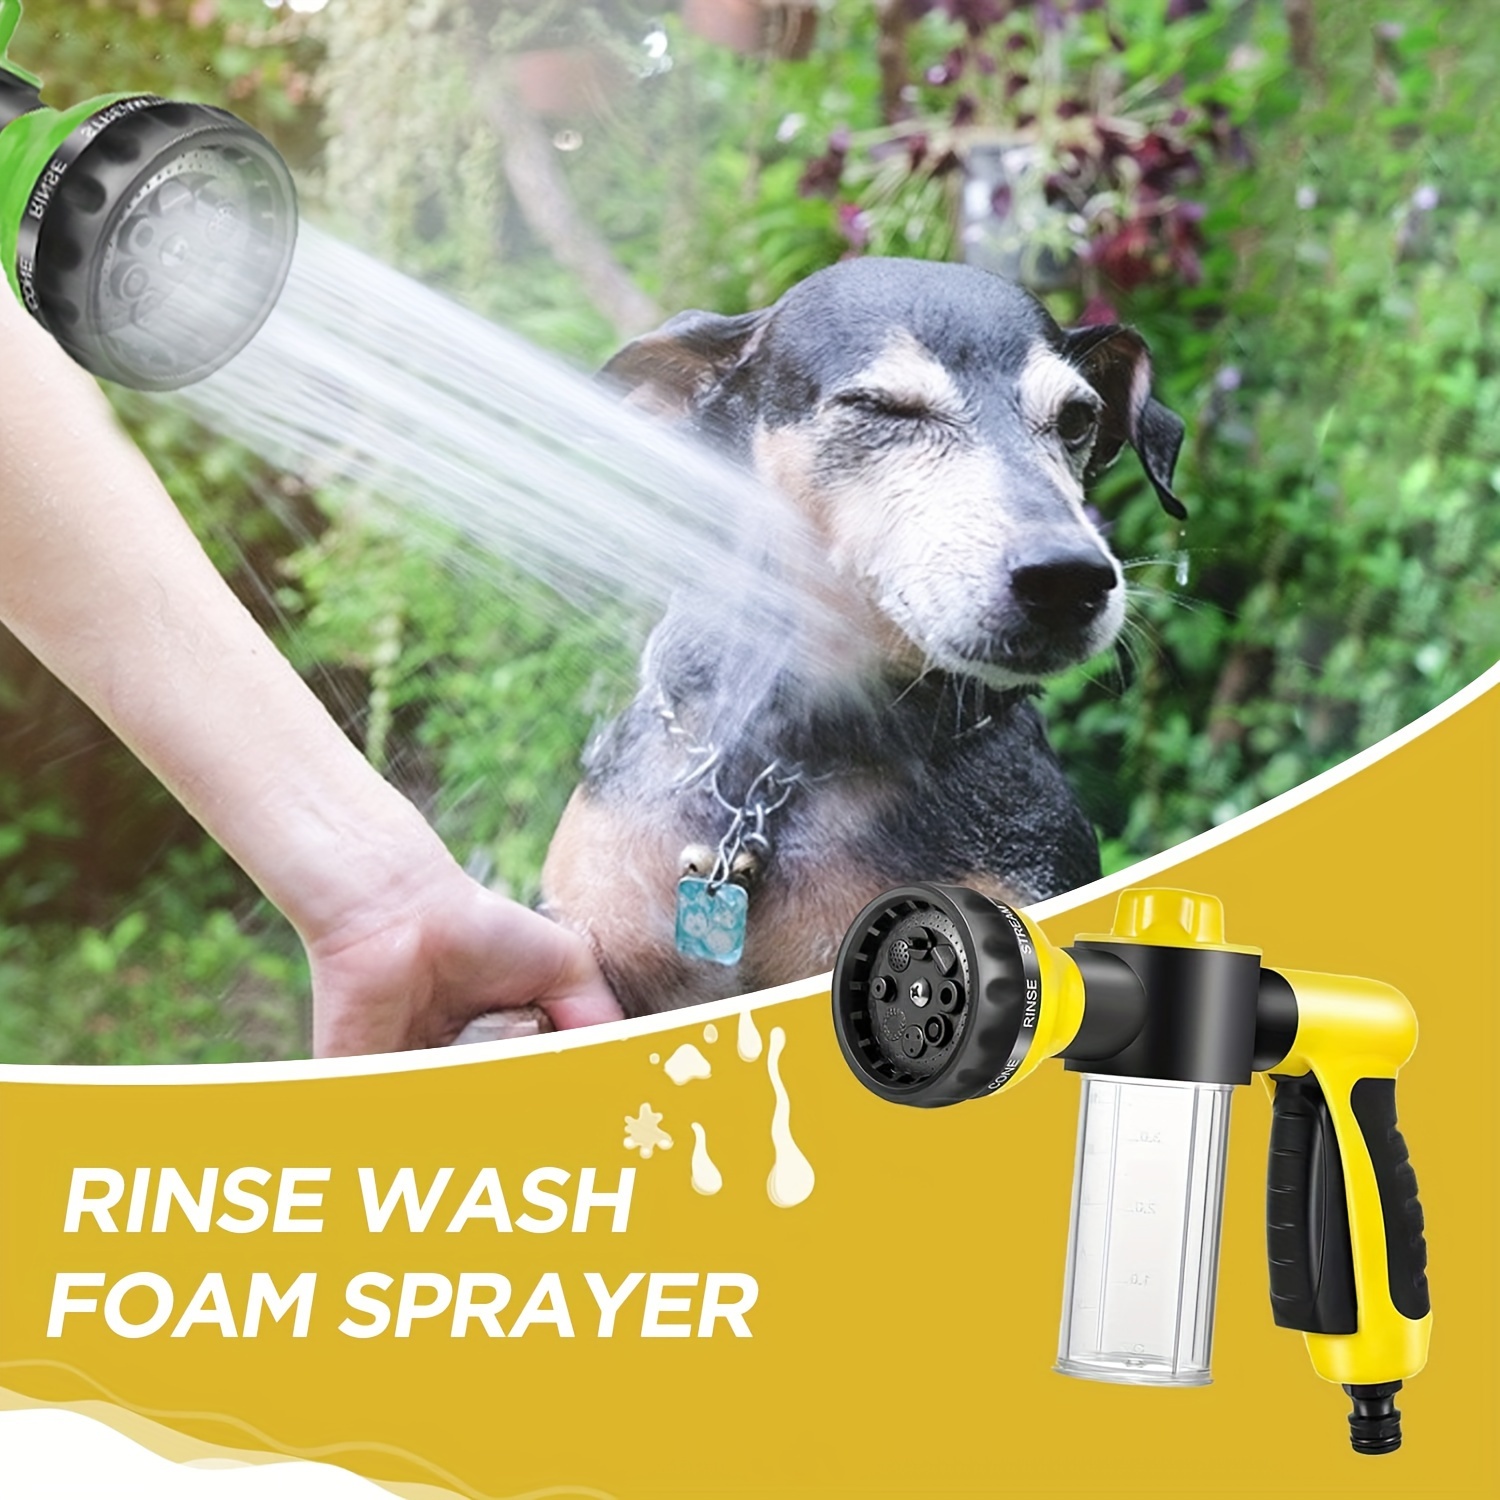  Pup Dog Wash Jet Hose Attachment, 10 Patterns Garden Hose  Sprayer Nozzle, High Pressure Water Foam Sprayer with Soap Dispenser Bottle  for Car Washing, Watering Plants, Pet Showering Bathing Tool 